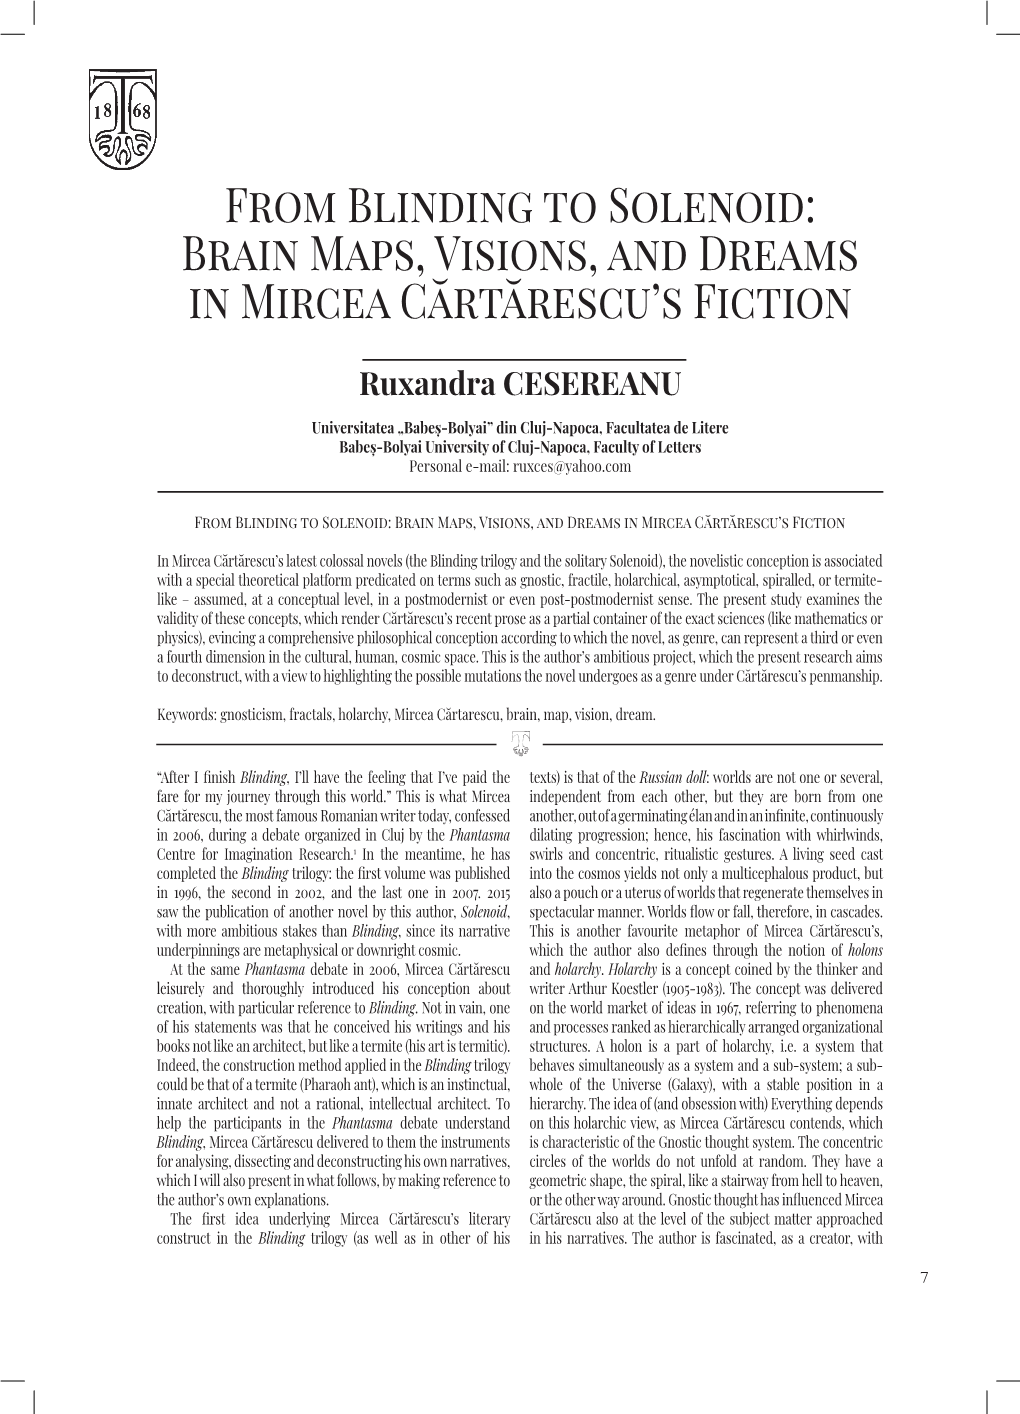 From Blinding to Solenoid: Brain Maps, Visions, and Dreams in Mircea Cărtărescu’S Fiction